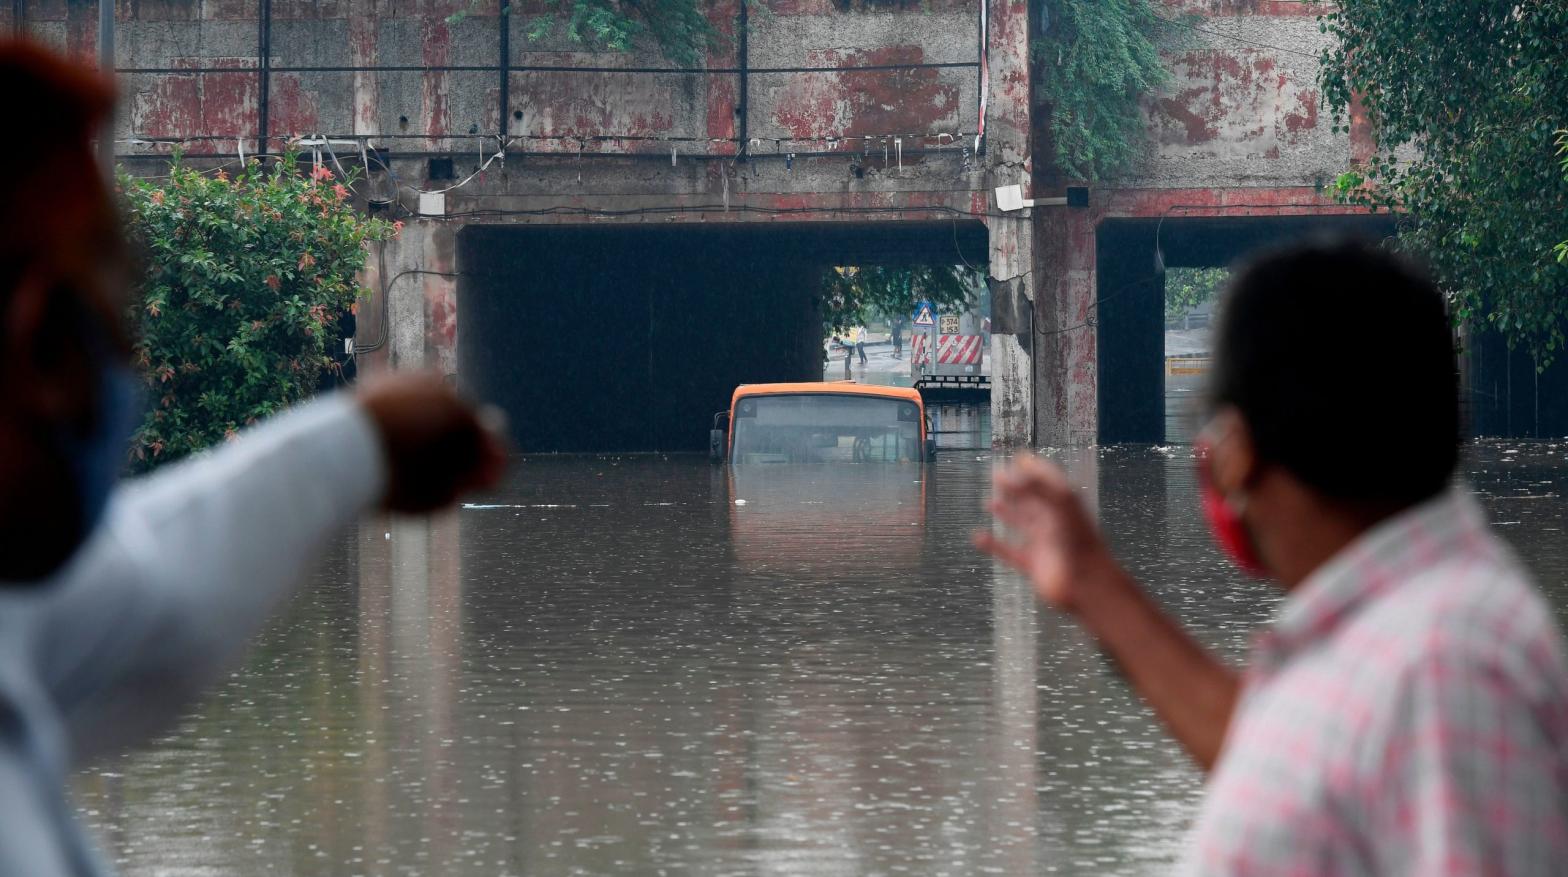 Local residents look at a submerged bus in a waterlogged road underpass after monsoon rainfalls in New Delhi (Photo: Prakash Singh, Getty Images)